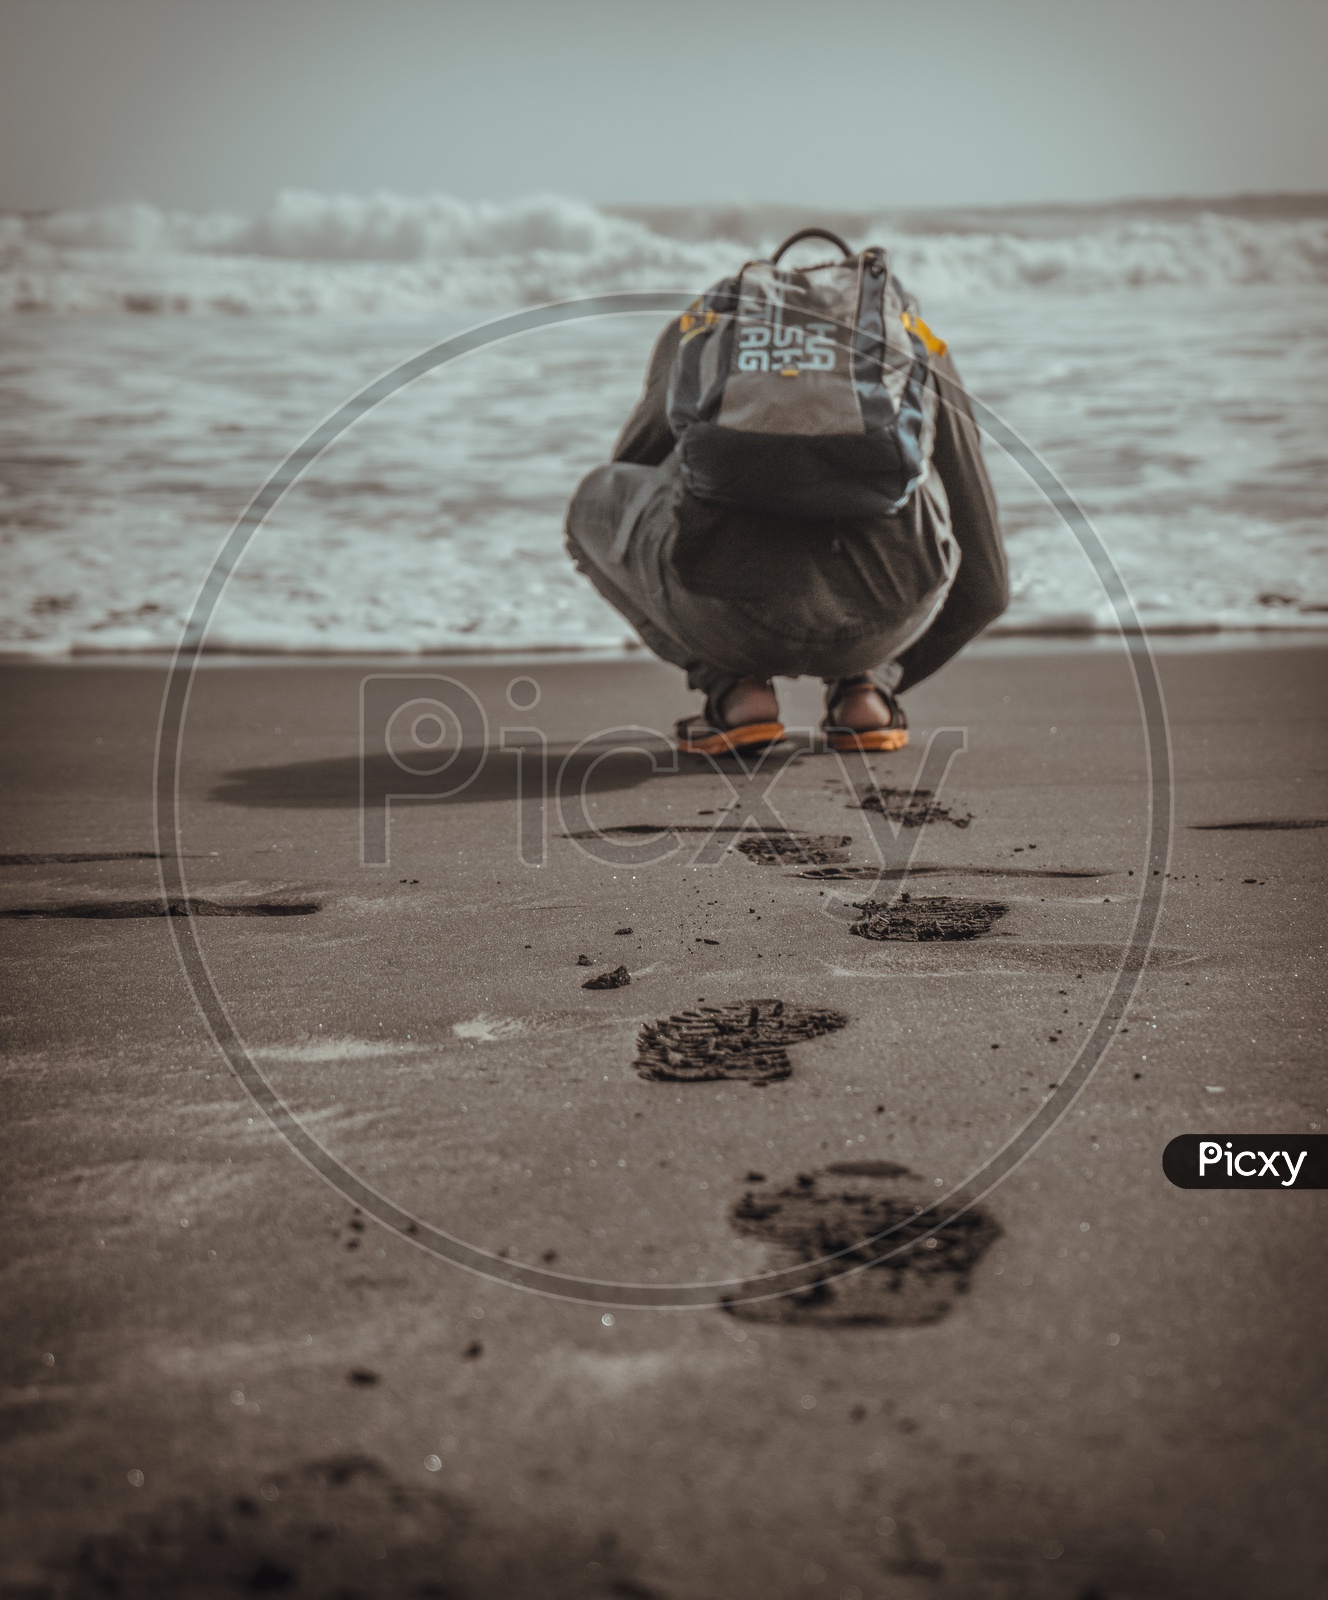 A photographer clicking pictures at the beach